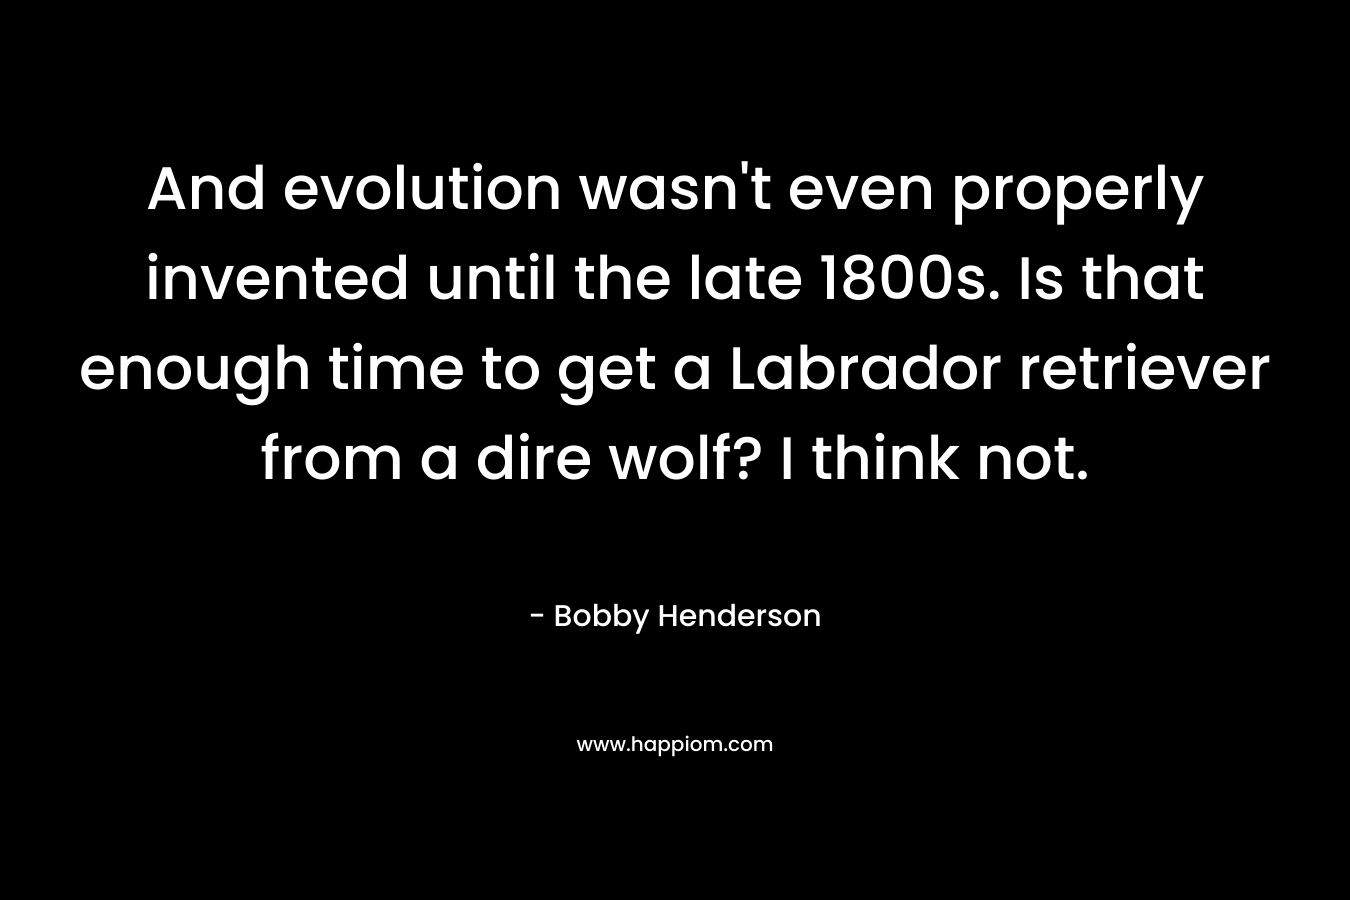 And evolution wasn't even properly invented until the late 1800s. Is that enough time to get a Labrador retriever from a dire wolf? I think not.